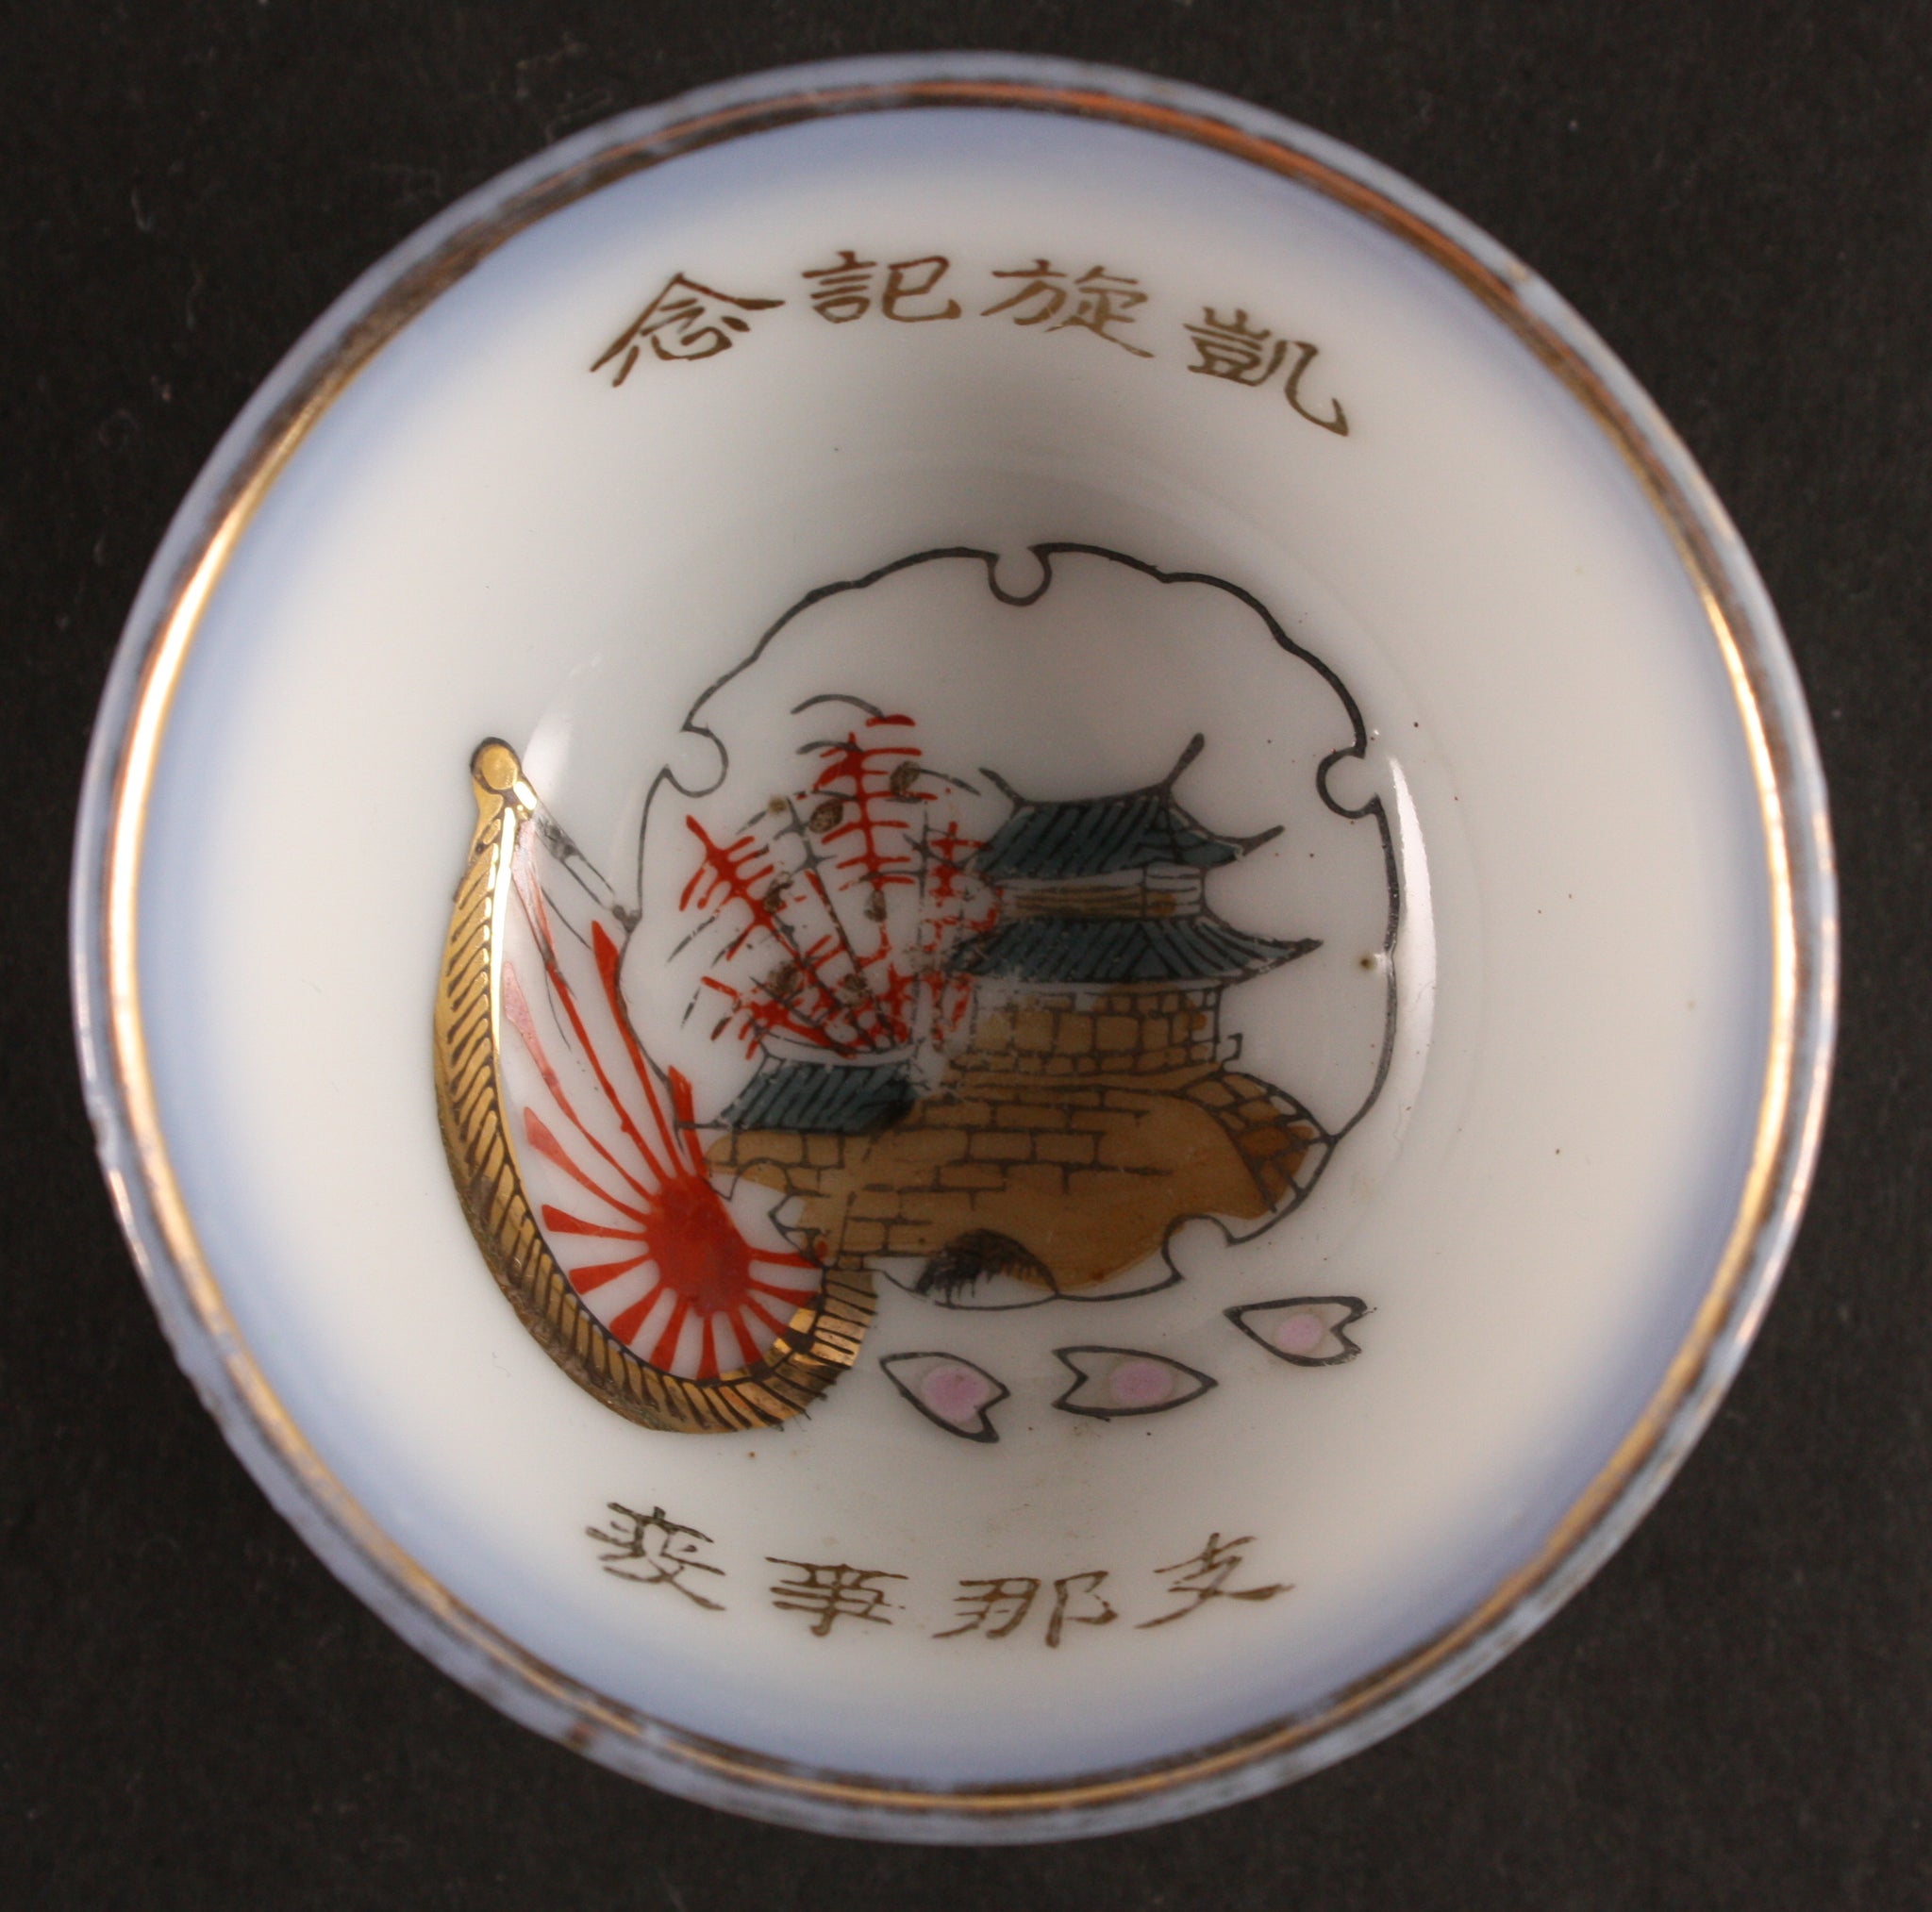 Antique Japanese Military Bombing Chinese City Gate Army Sake Cup